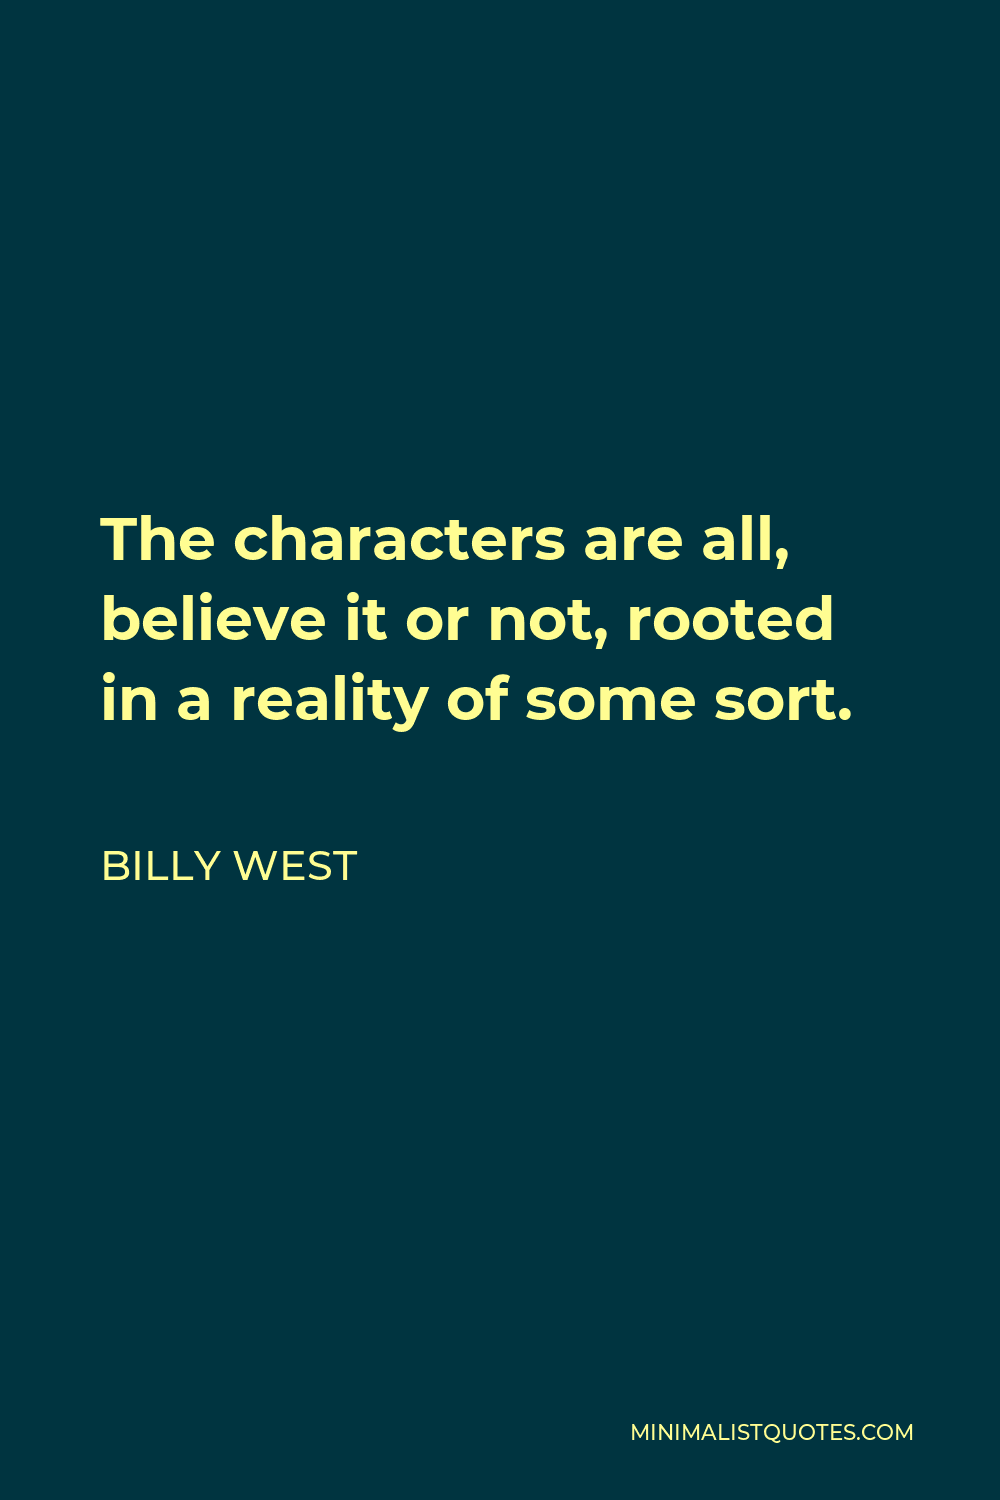 Billy West Quote - The characters are all, believe it or not, rooted in a reality of some sort.